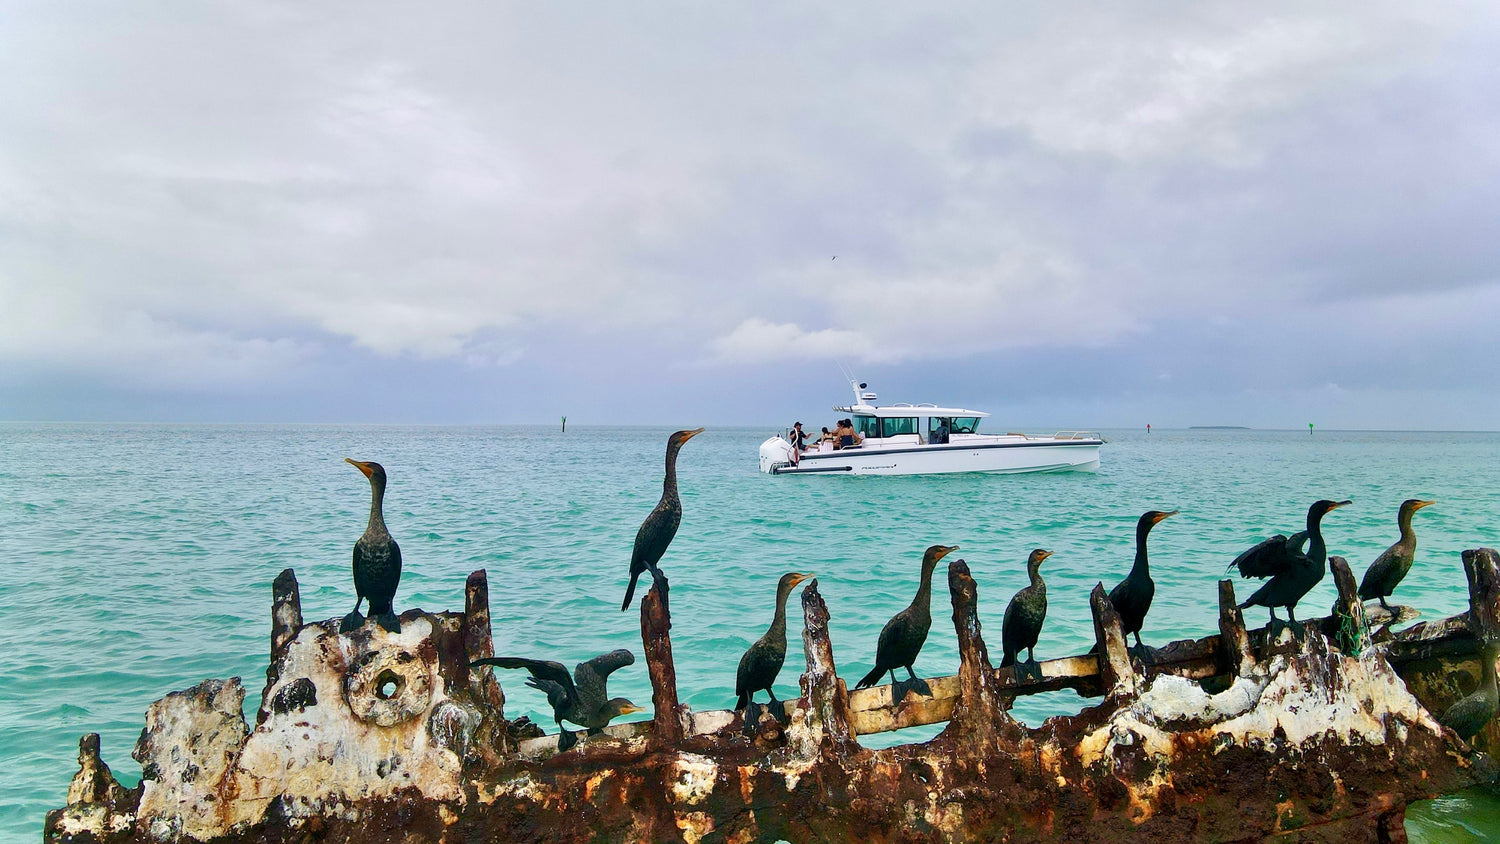 BOAT CHARTER IN KEY WEST VISITING SHIP WRECK THAT IS SAFE HAVEN FOR BIRDS